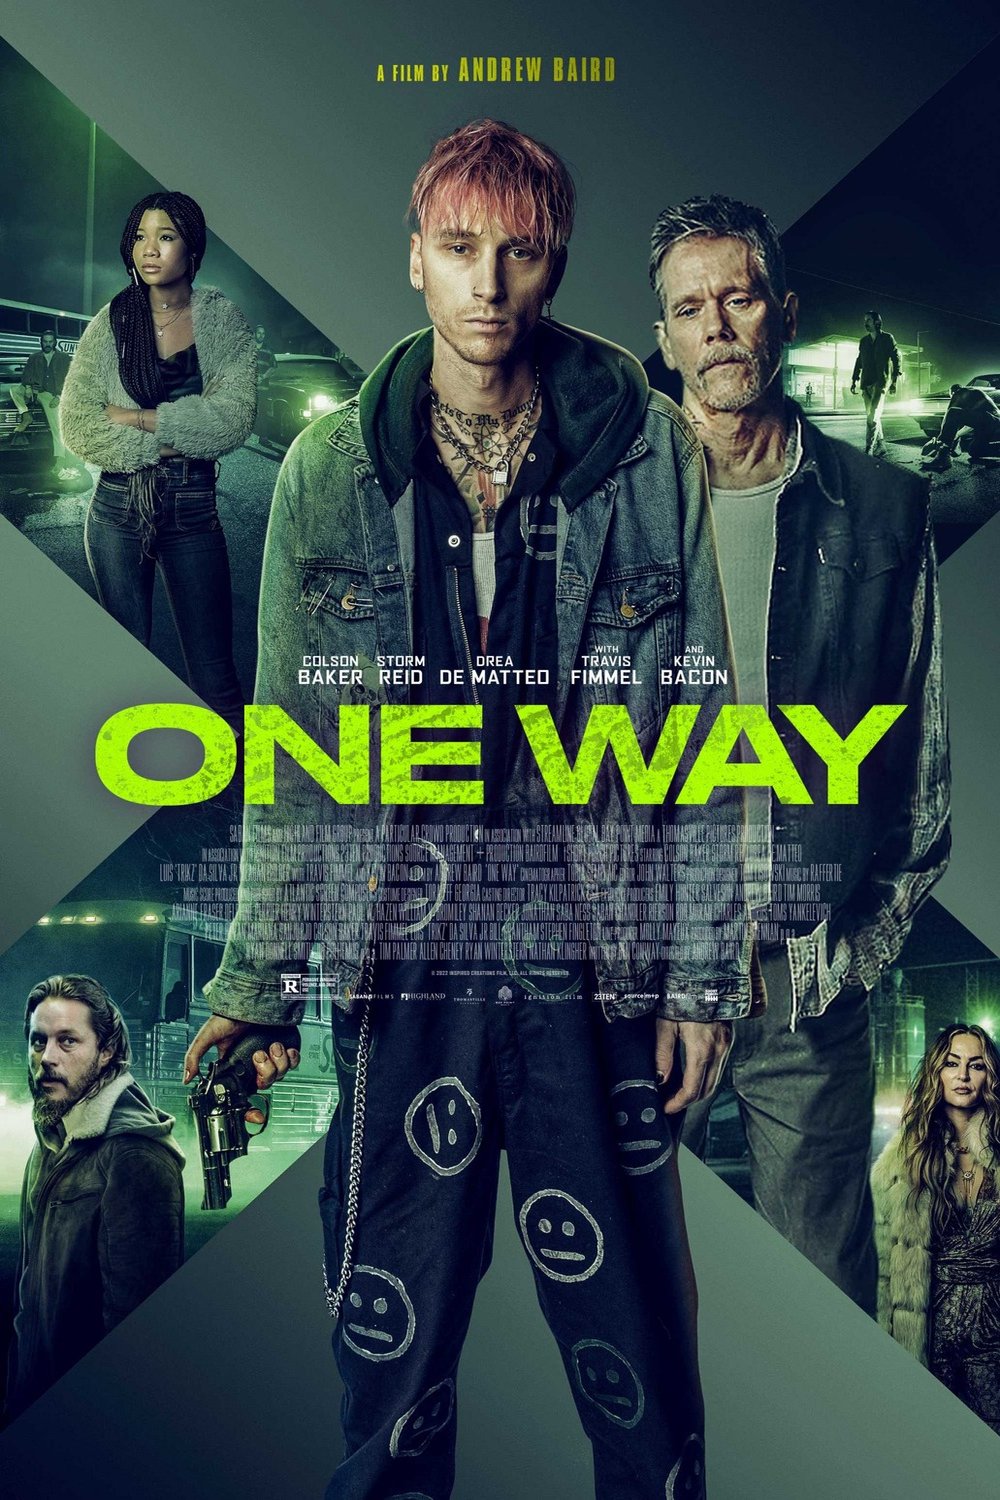 Poster of the movie One Way